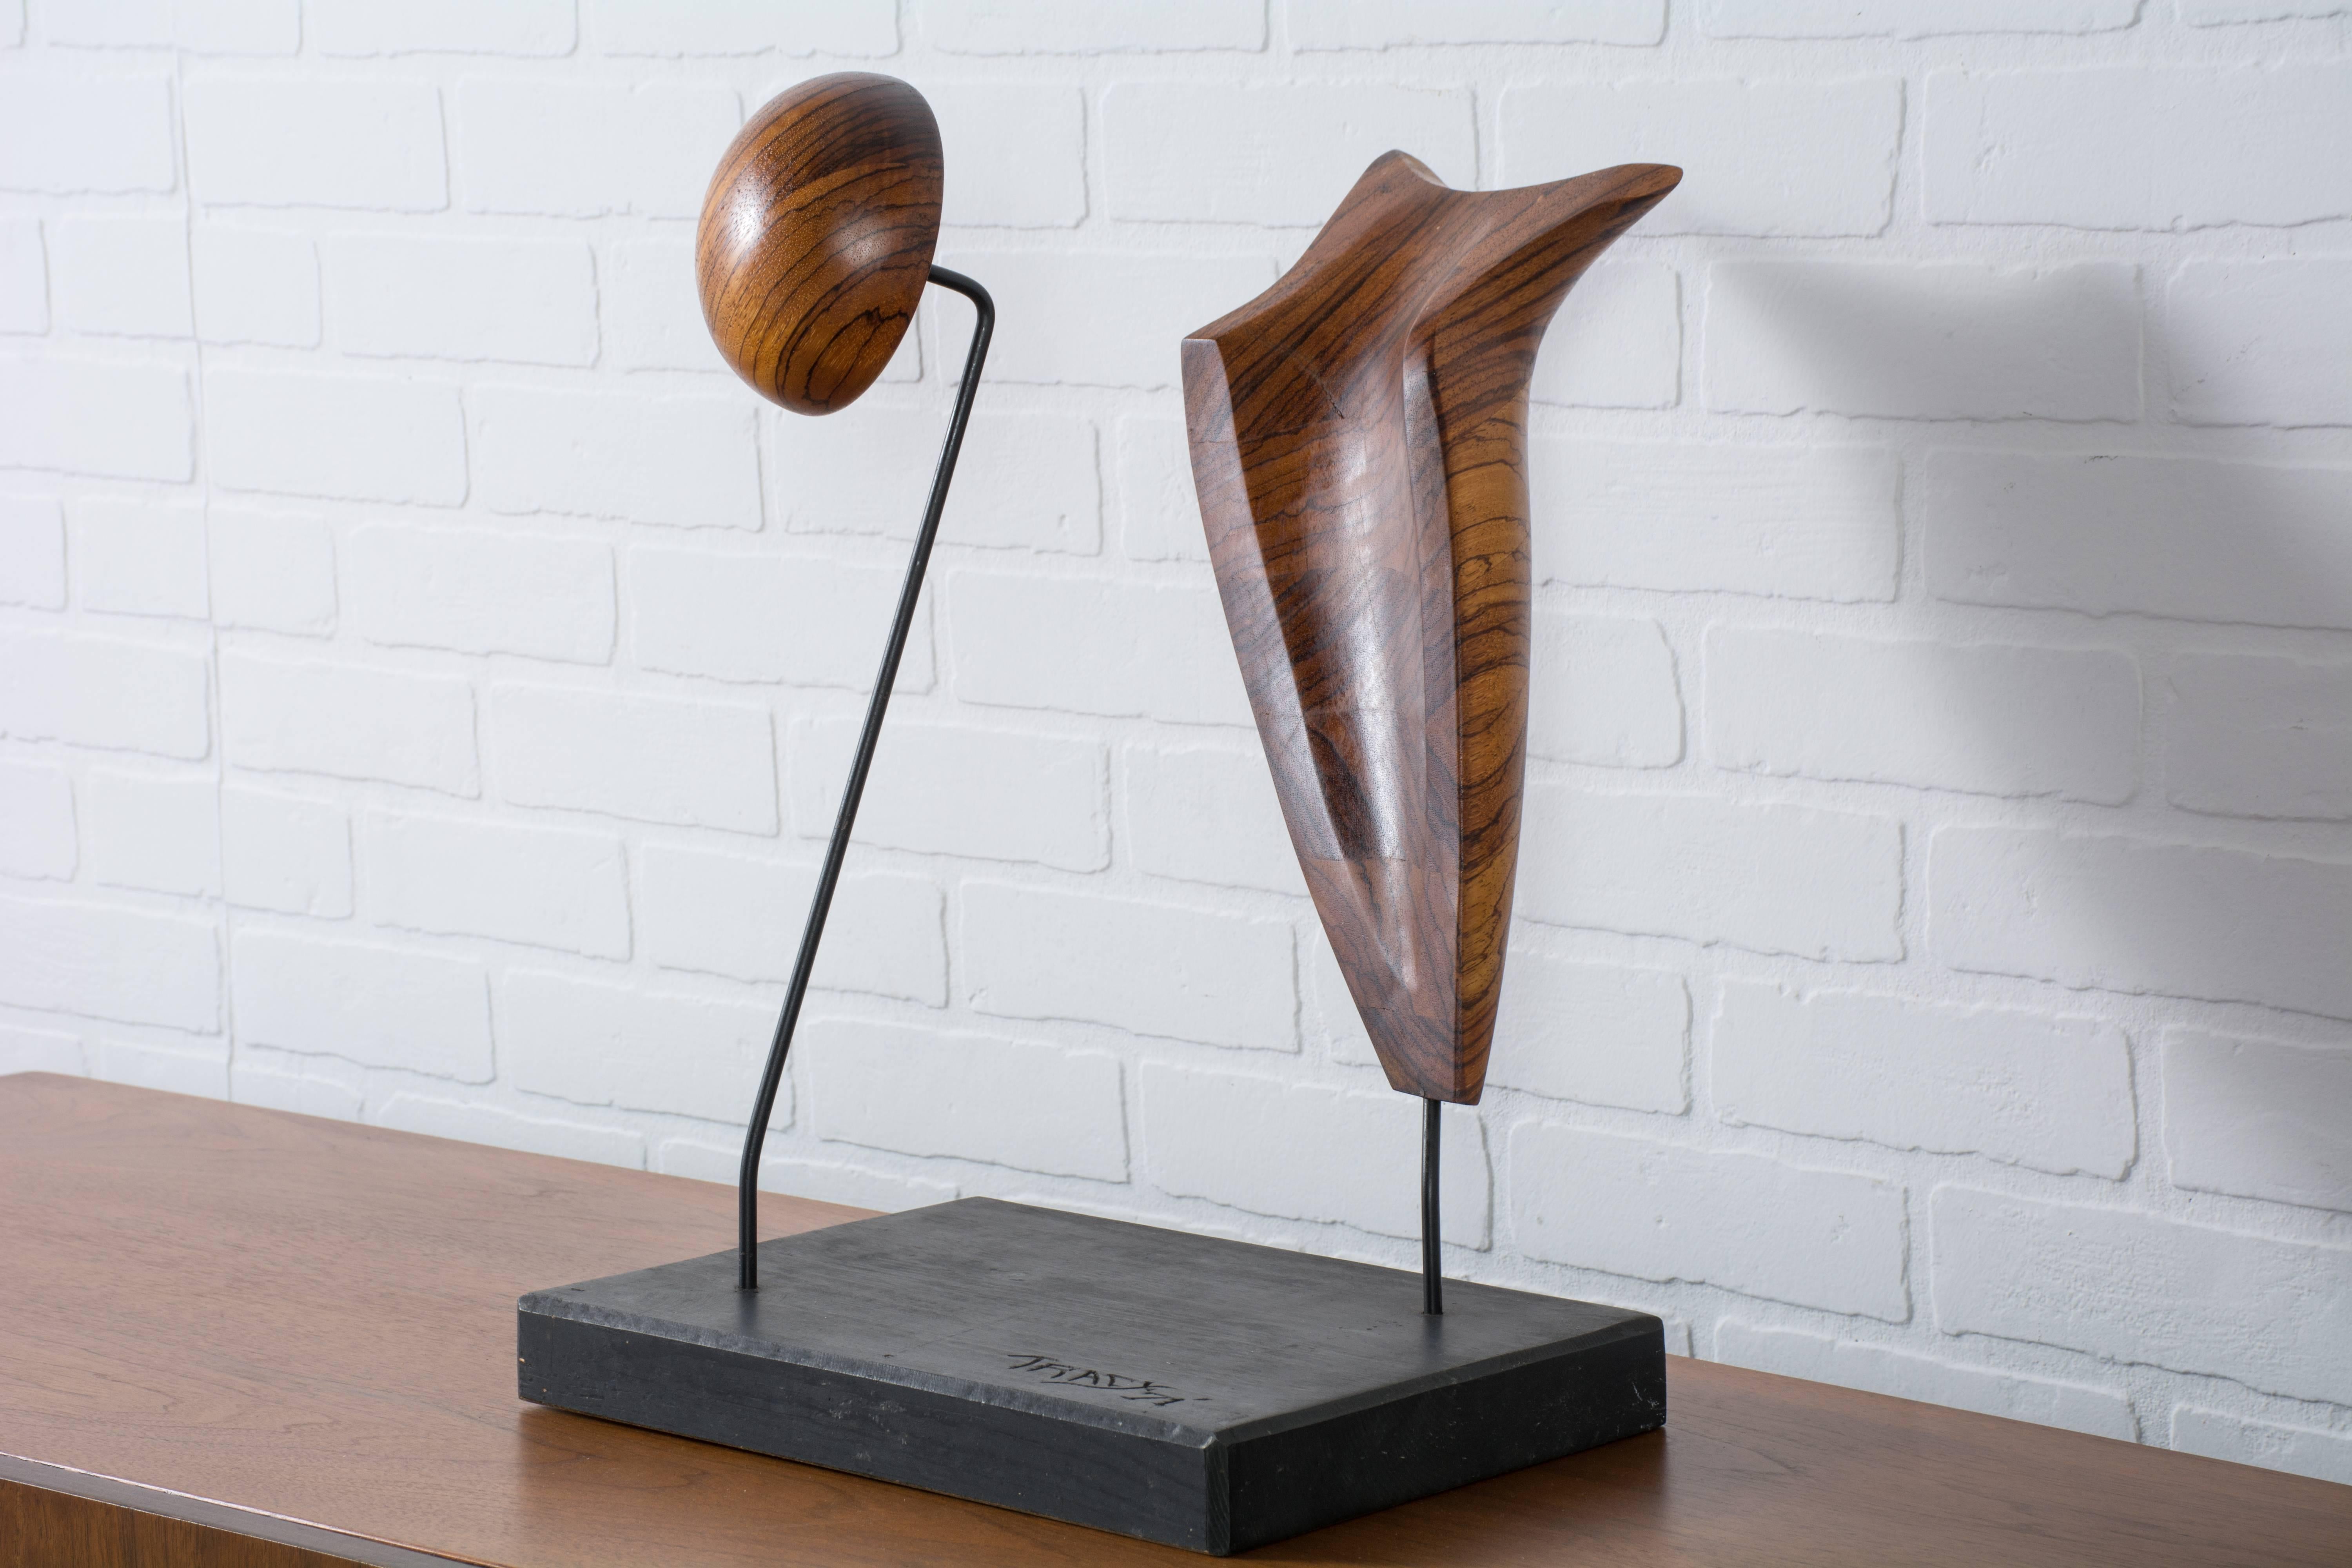 American Abstract Wood Sculpture Signed Tracy, 1971